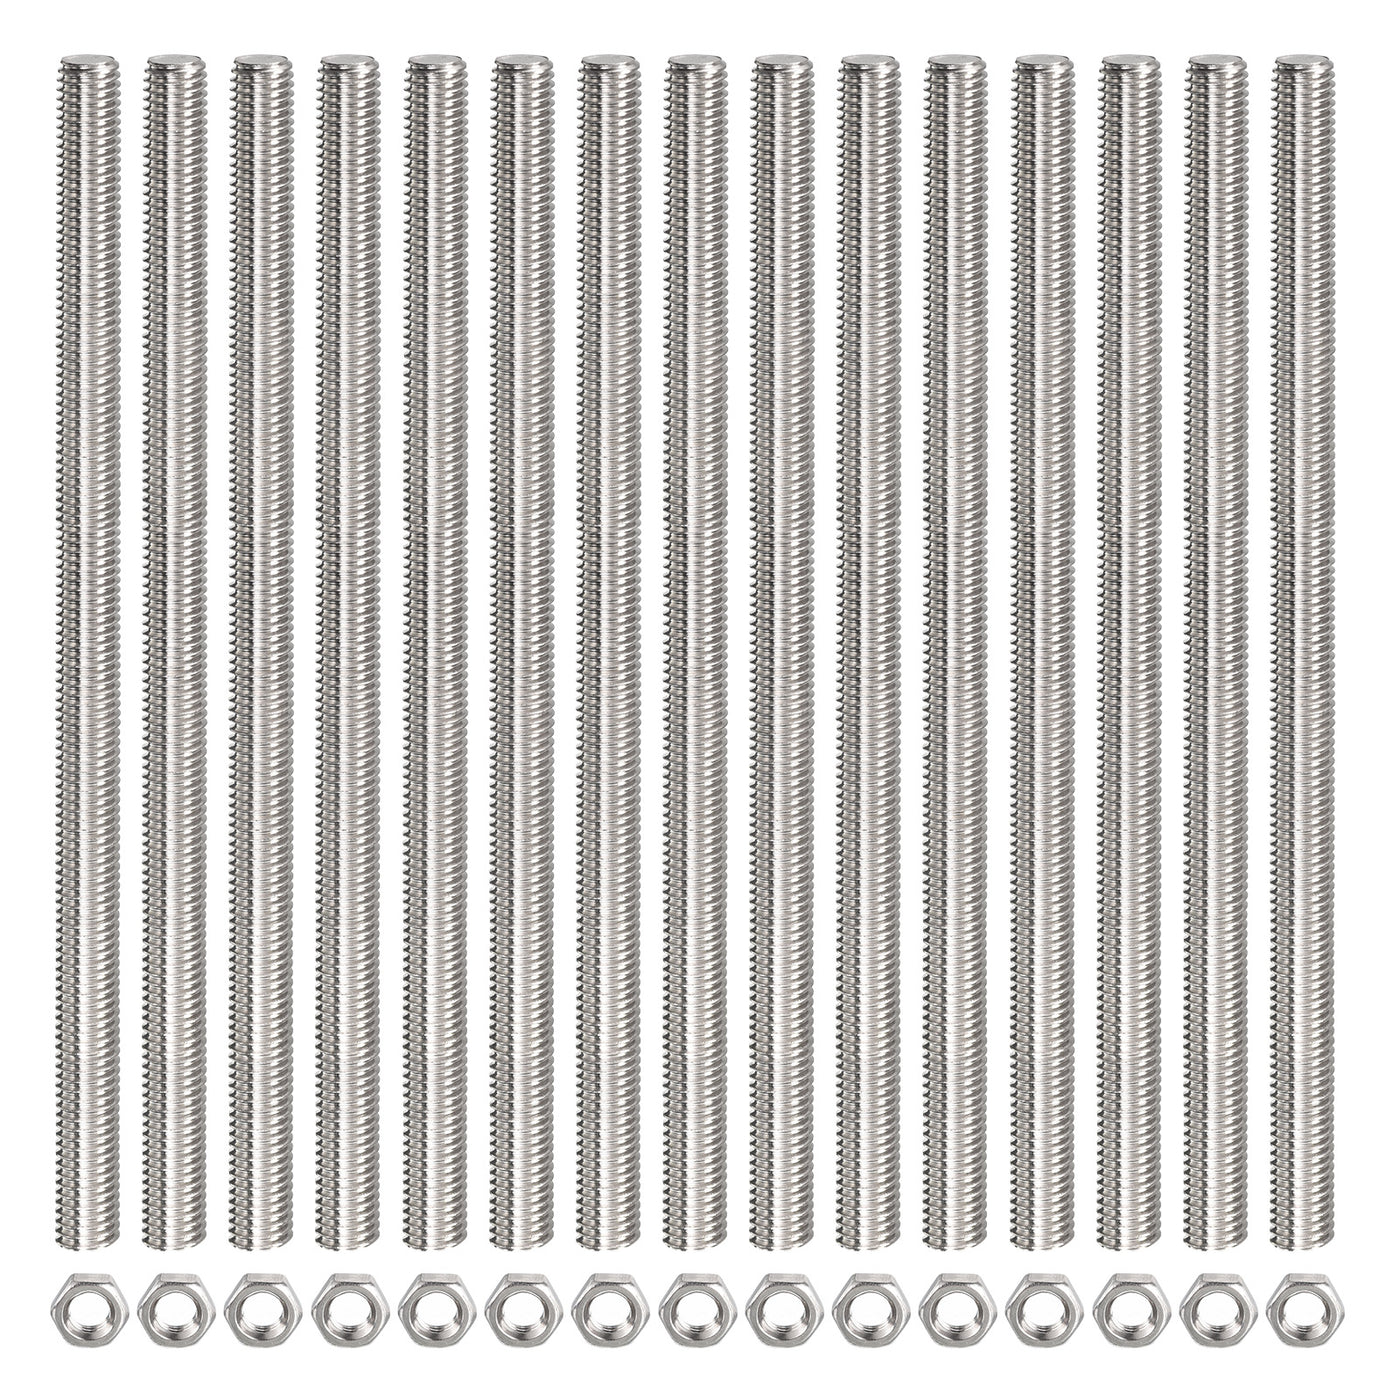 Harfington 15Pack M8 x 300mm Fully Threaded Rod W 15Pack Hex Nuts, 1.25mm Thread Pitch